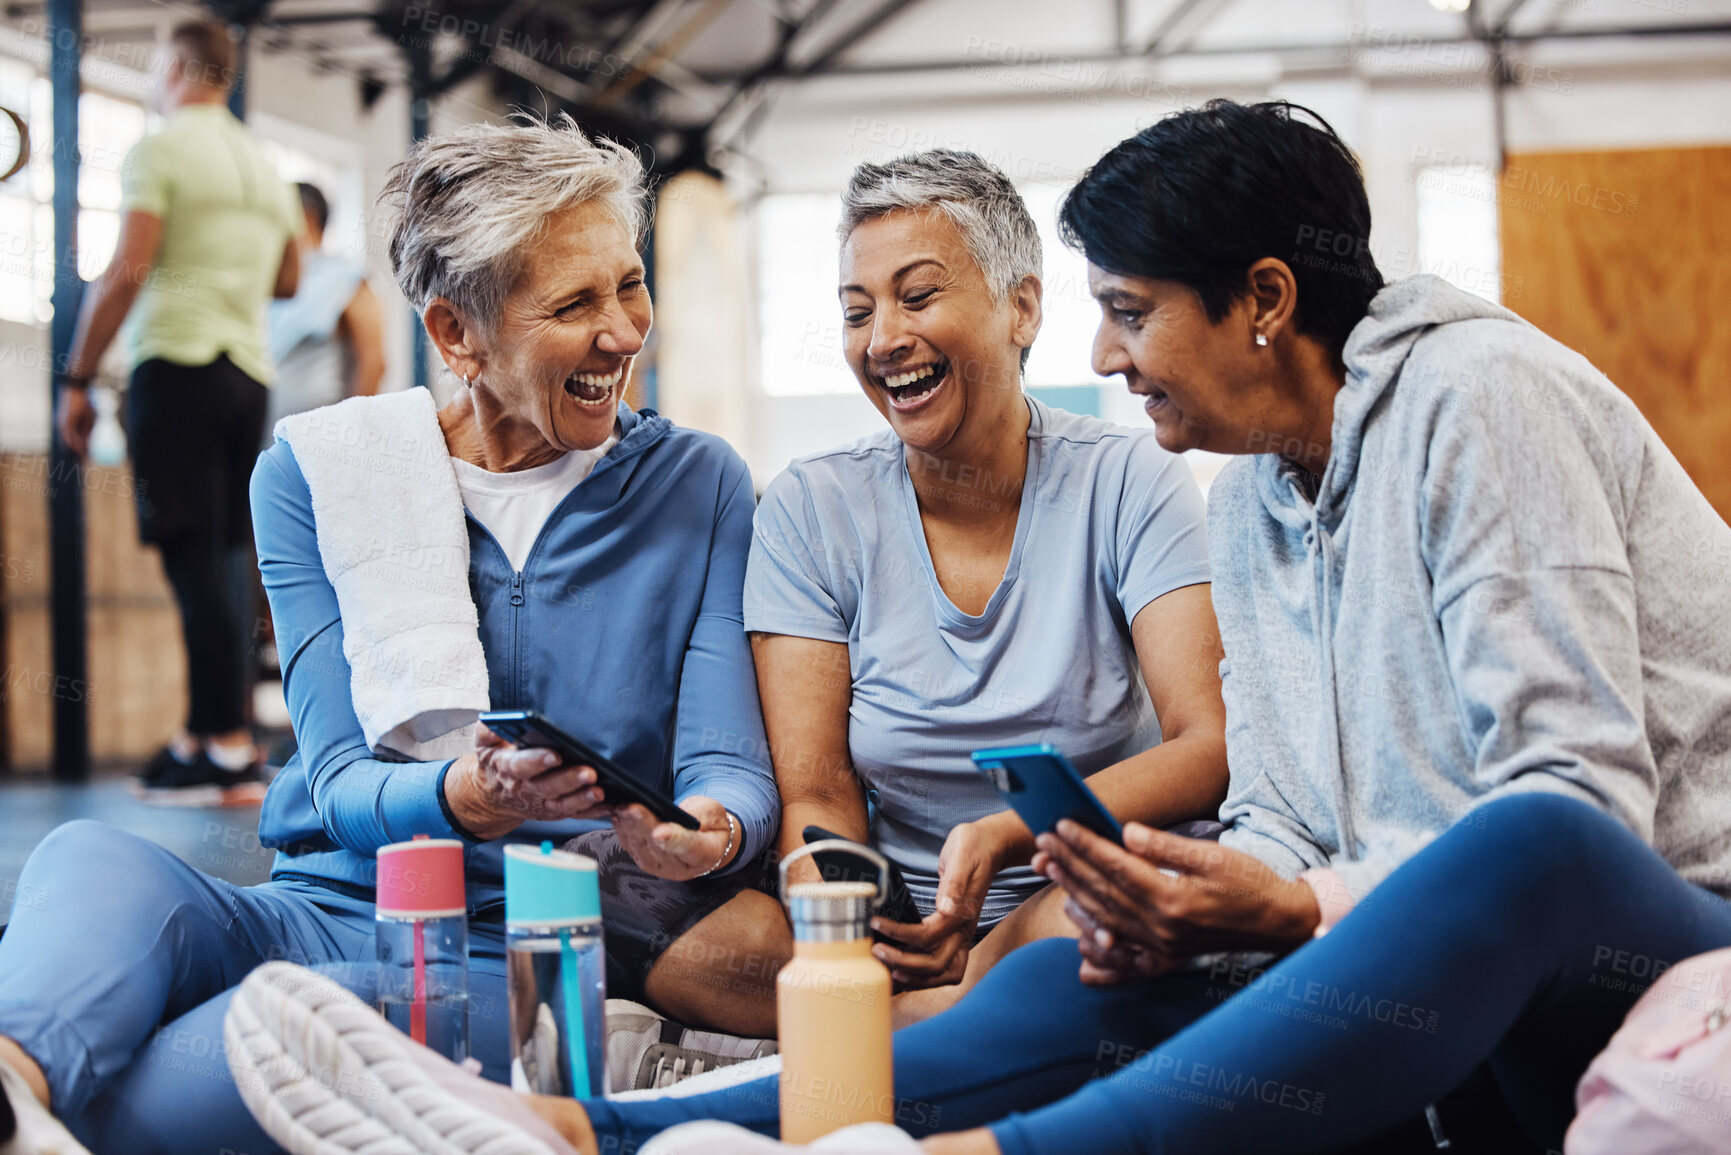 Buy stock photo Gym, smartphone and senior women laughing at meme on phone after fitness class, conversation and comedy on floor. Exercise, bonding and happy mature friends checking social media together at workout.